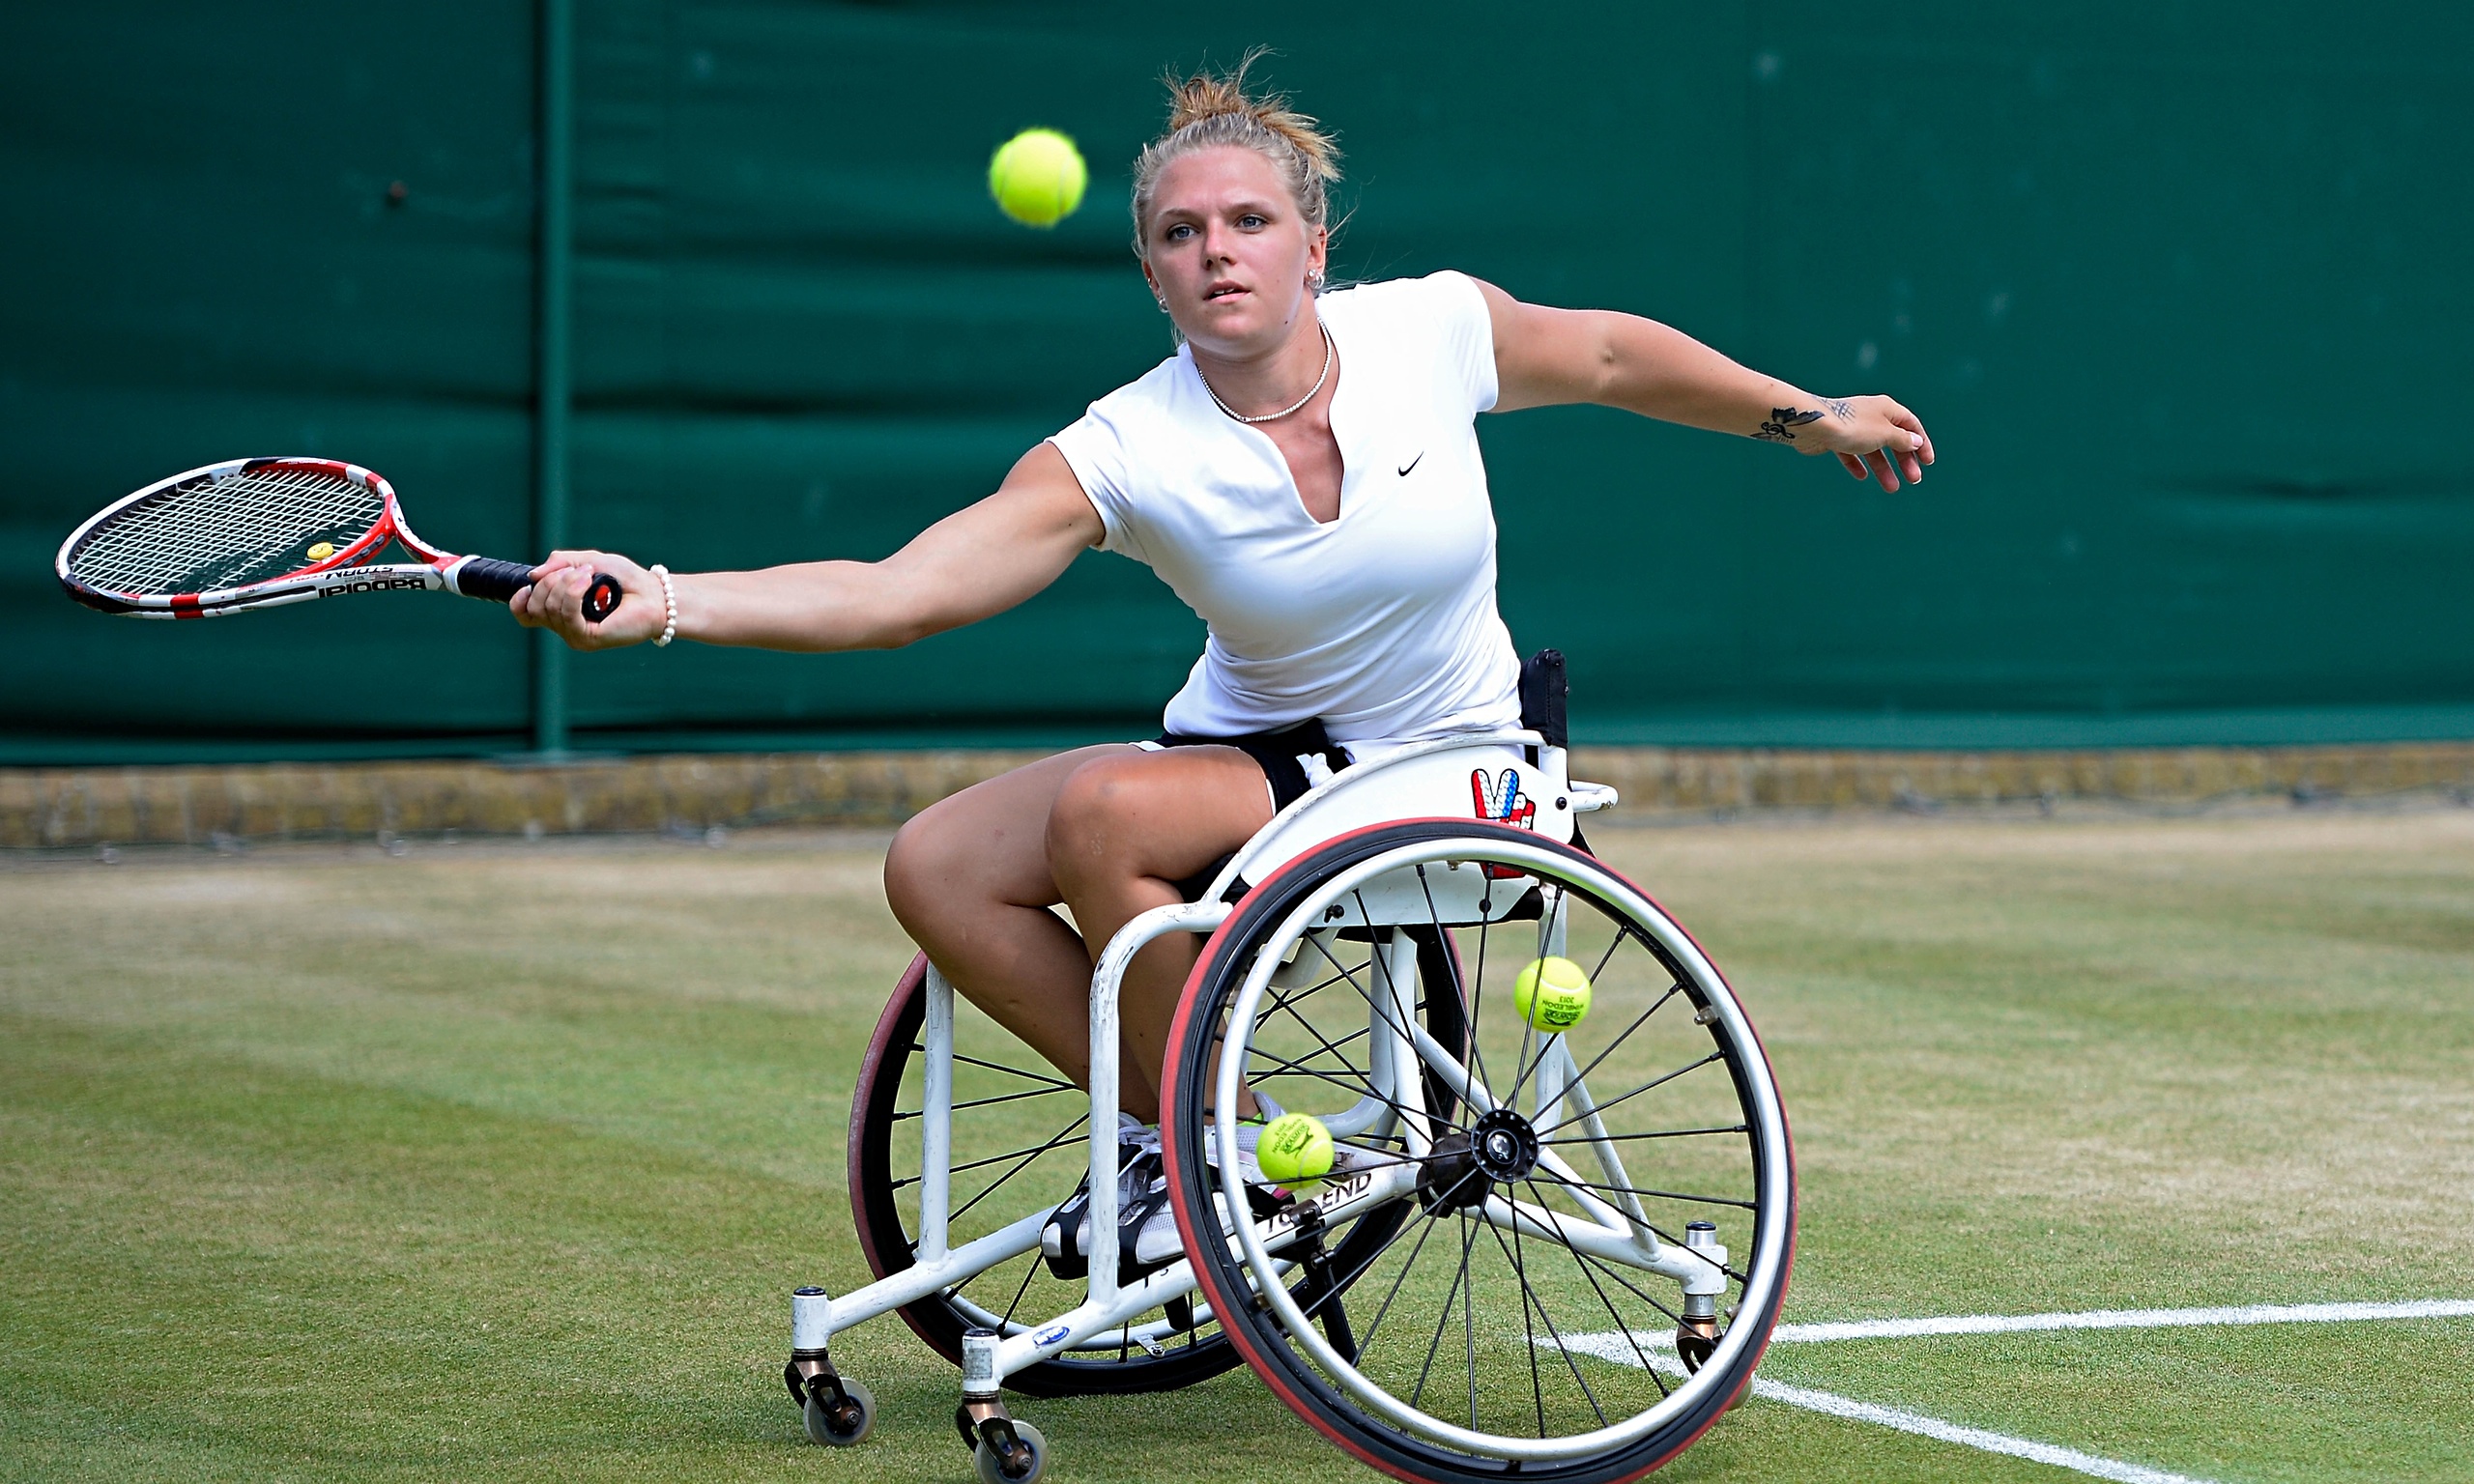 Jordanne Whiley goes for third time lucky in Wimbledon wheelchair